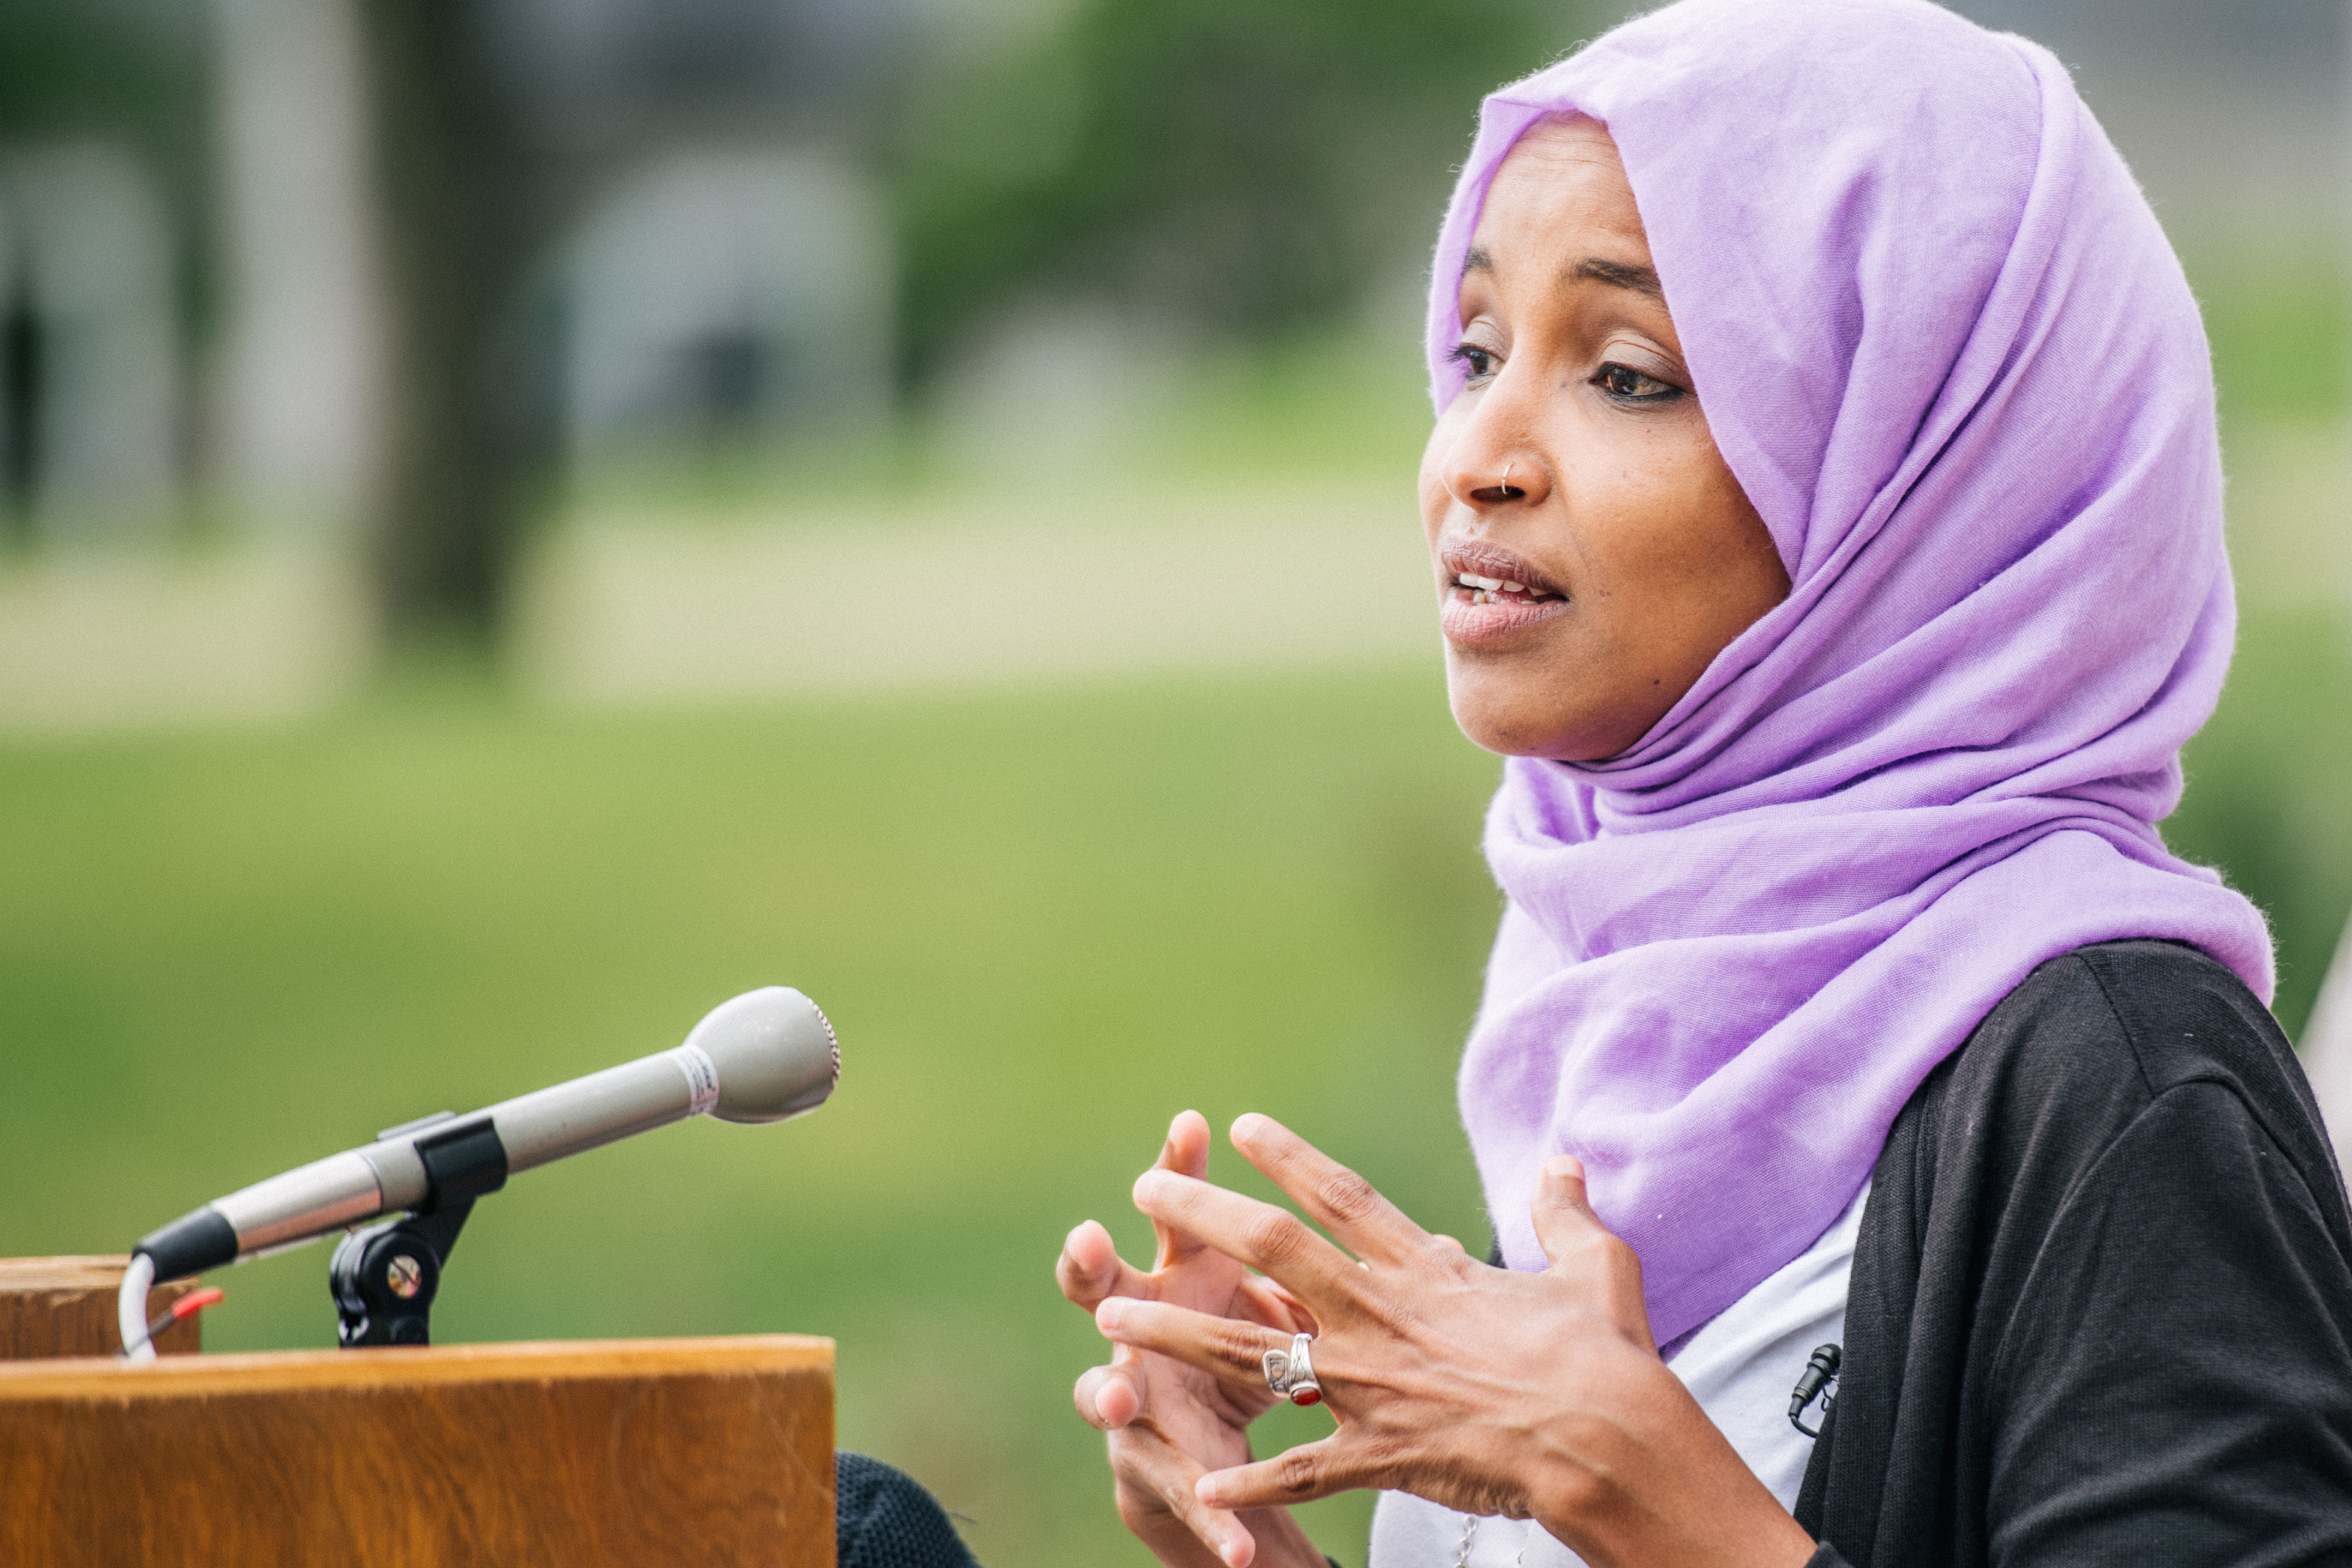 ST PAUL, MN - JULY 07: U.S. Rep. Ihan Omar (D-MN) speaks during a press conference on July 7, 2020 in St. Paul, Minnesota. A press conference was held by the Minnesota People of Color and Indigenous caucus to discuss work on the state and federal level to make systematic changes to address institutional racism. (Brandon Bell/Getty Images)